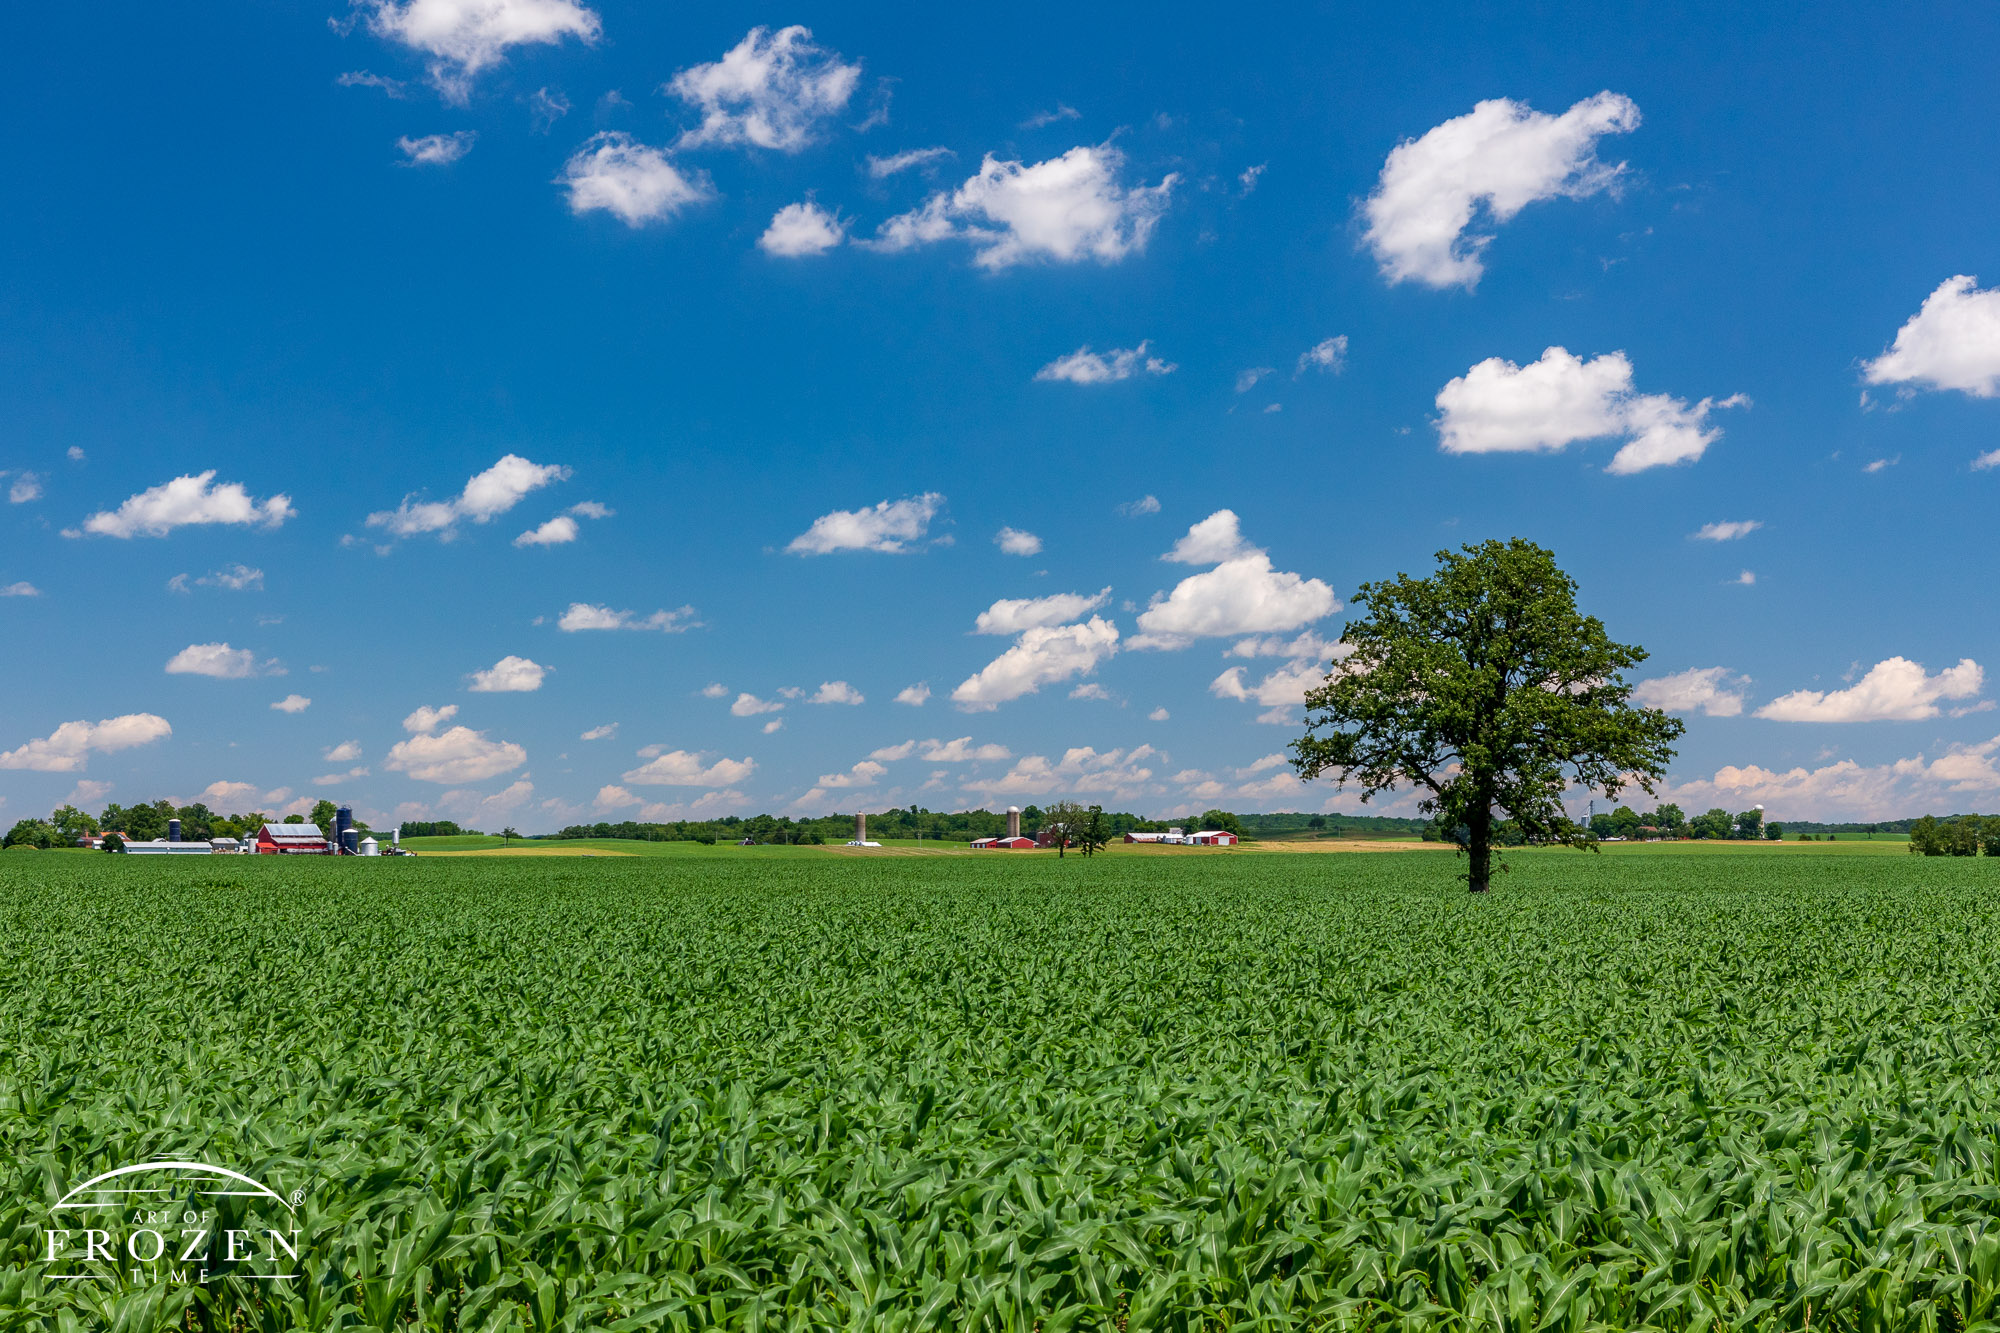 Lands pressed smooth from the last glacial period today host miles of corn fields and white puffy clouds pass through the blue sky on this summer day